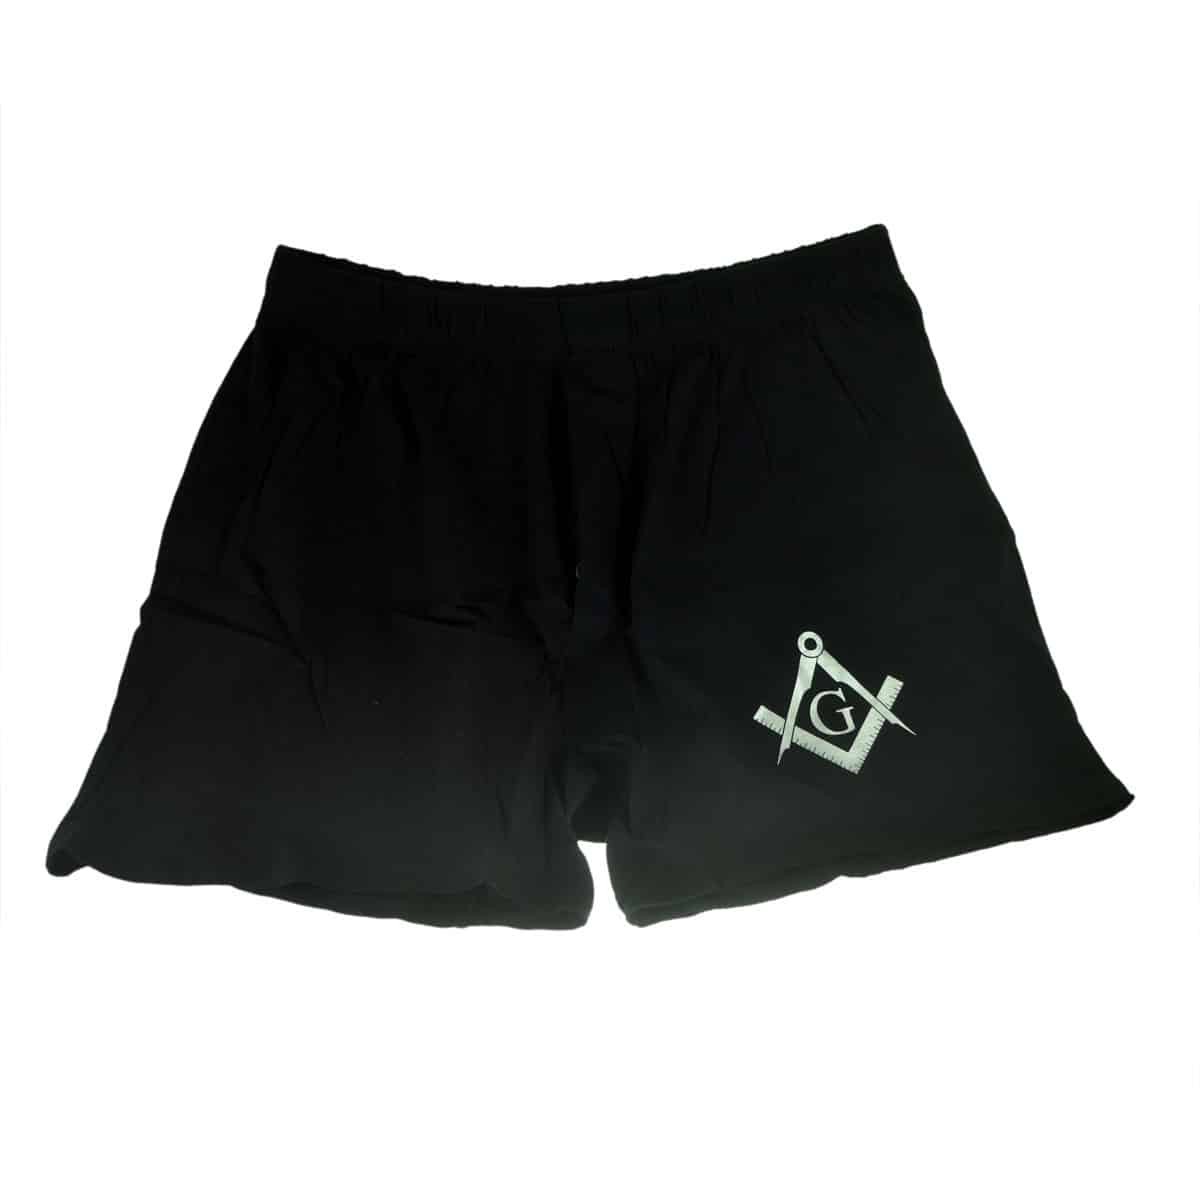 Masonic Boxer Shorts with Silver Design available with or without G ...